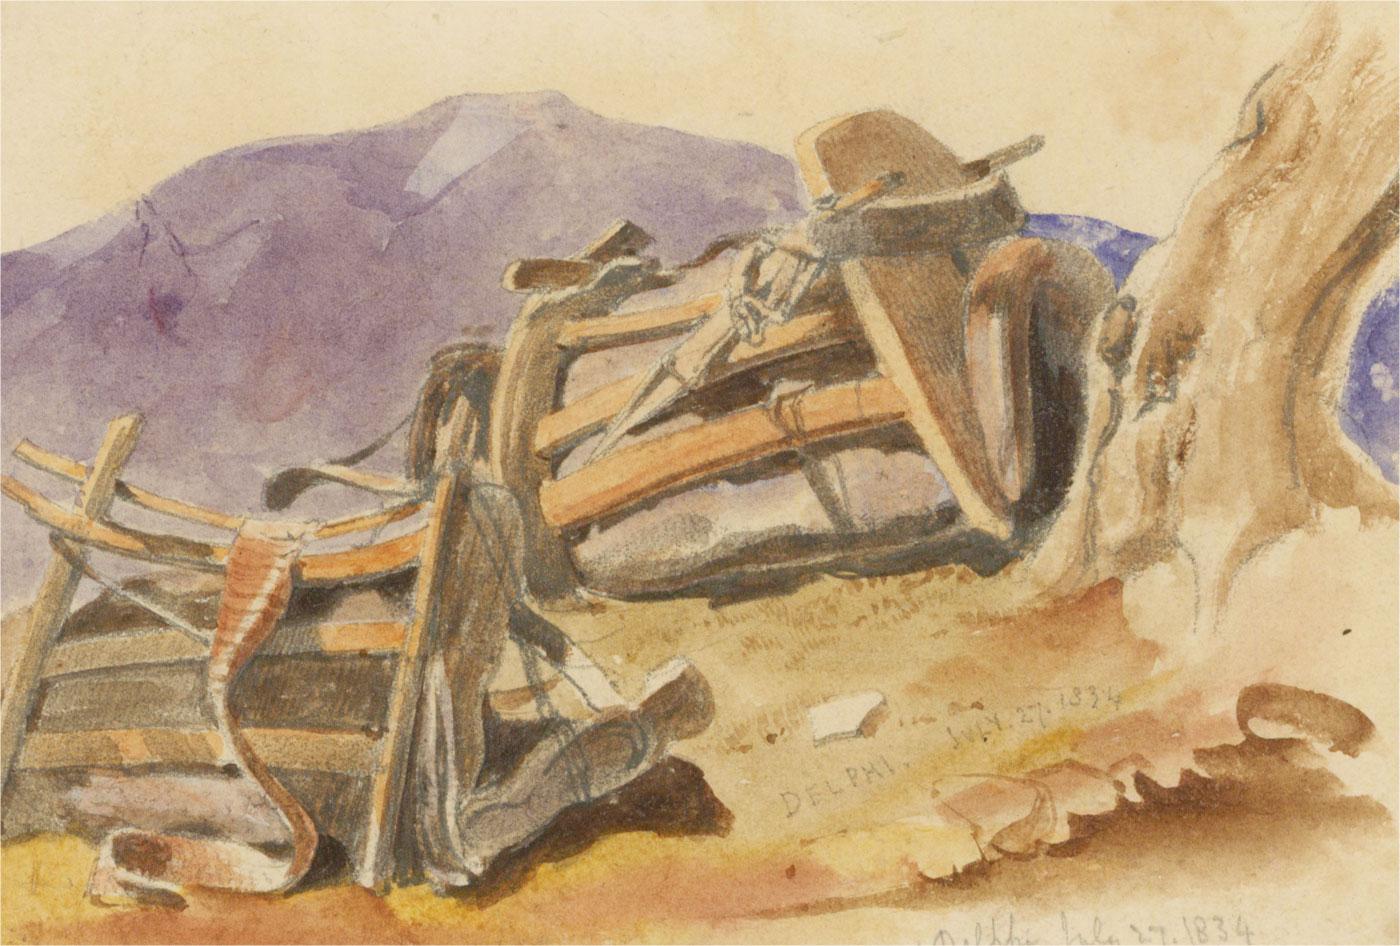 A delightful early 19th-century graphite and watercolour study of agricultural equipment. Inscribed with the location 'Delphi and the date 1834', Cromek was known to have been touring the picturesque scenery of Italy and Greece from 1831 until 1849.